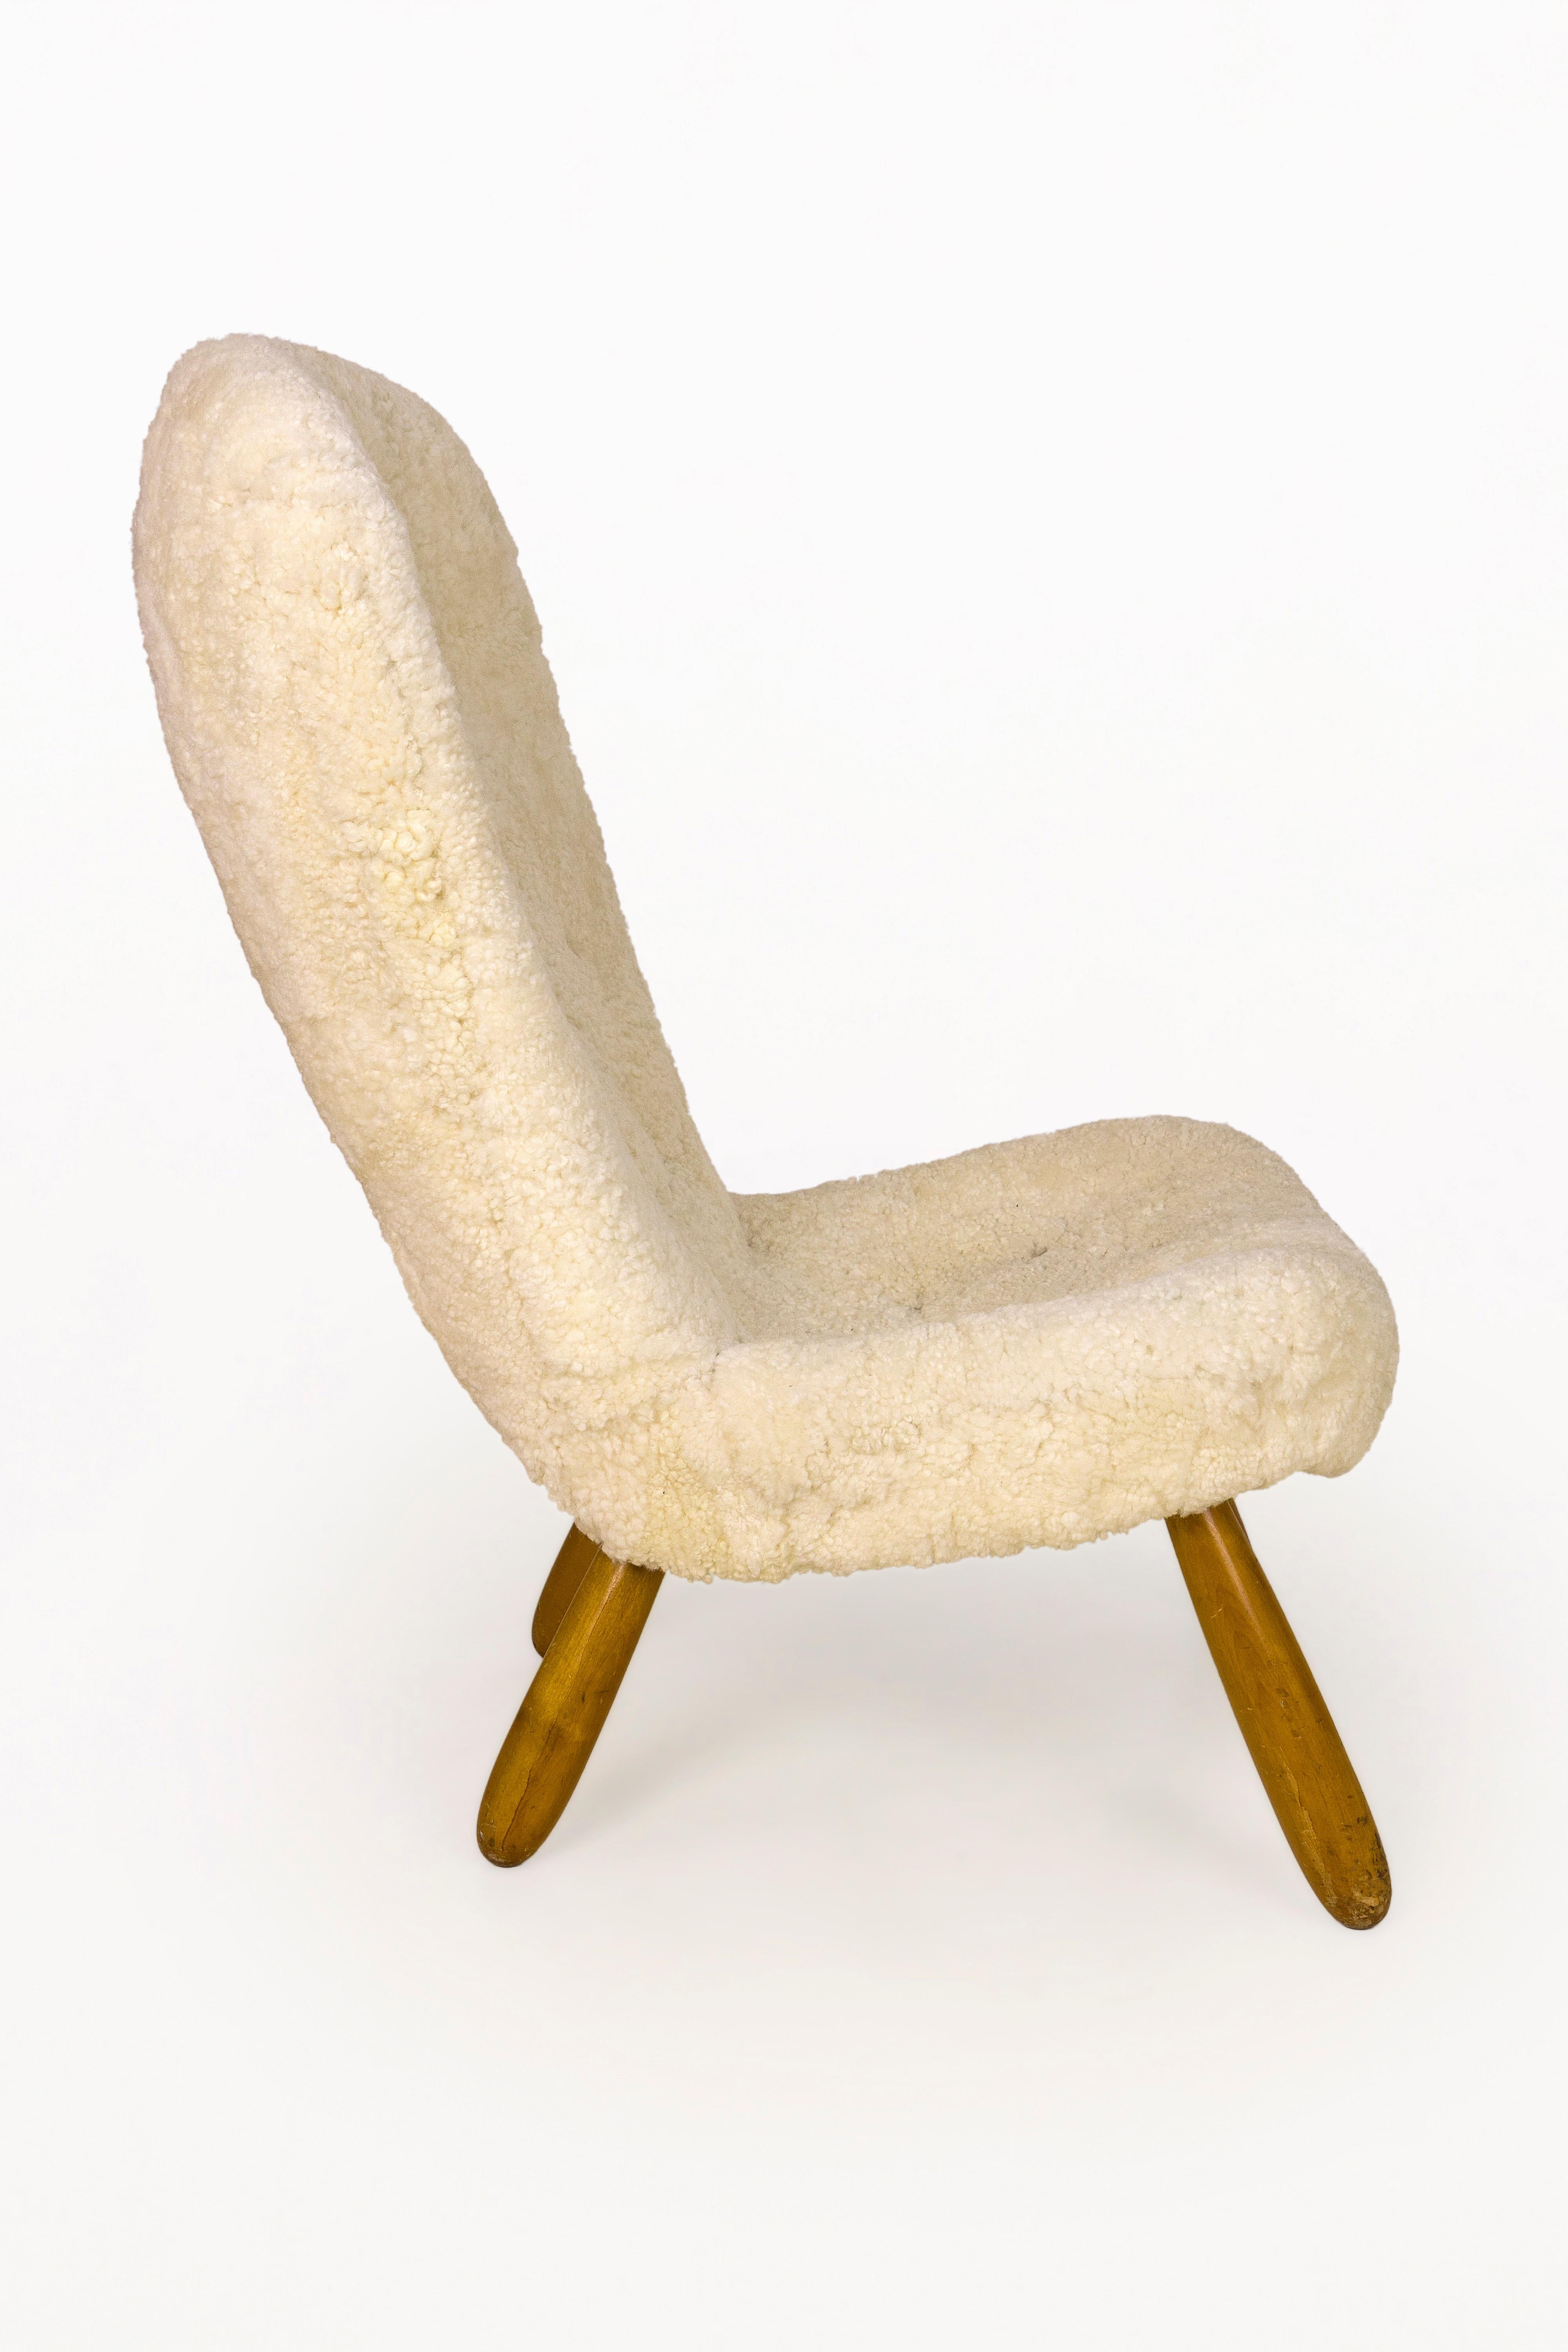 Philip Arctander (1944),
Bergere chair covered with sheep,
circa 1950, Modern Scandinavia, Sweden.
Clam model.
Measures: Height 97 cm, seat height 37 cm, width 60 cm, depth 78 cm.